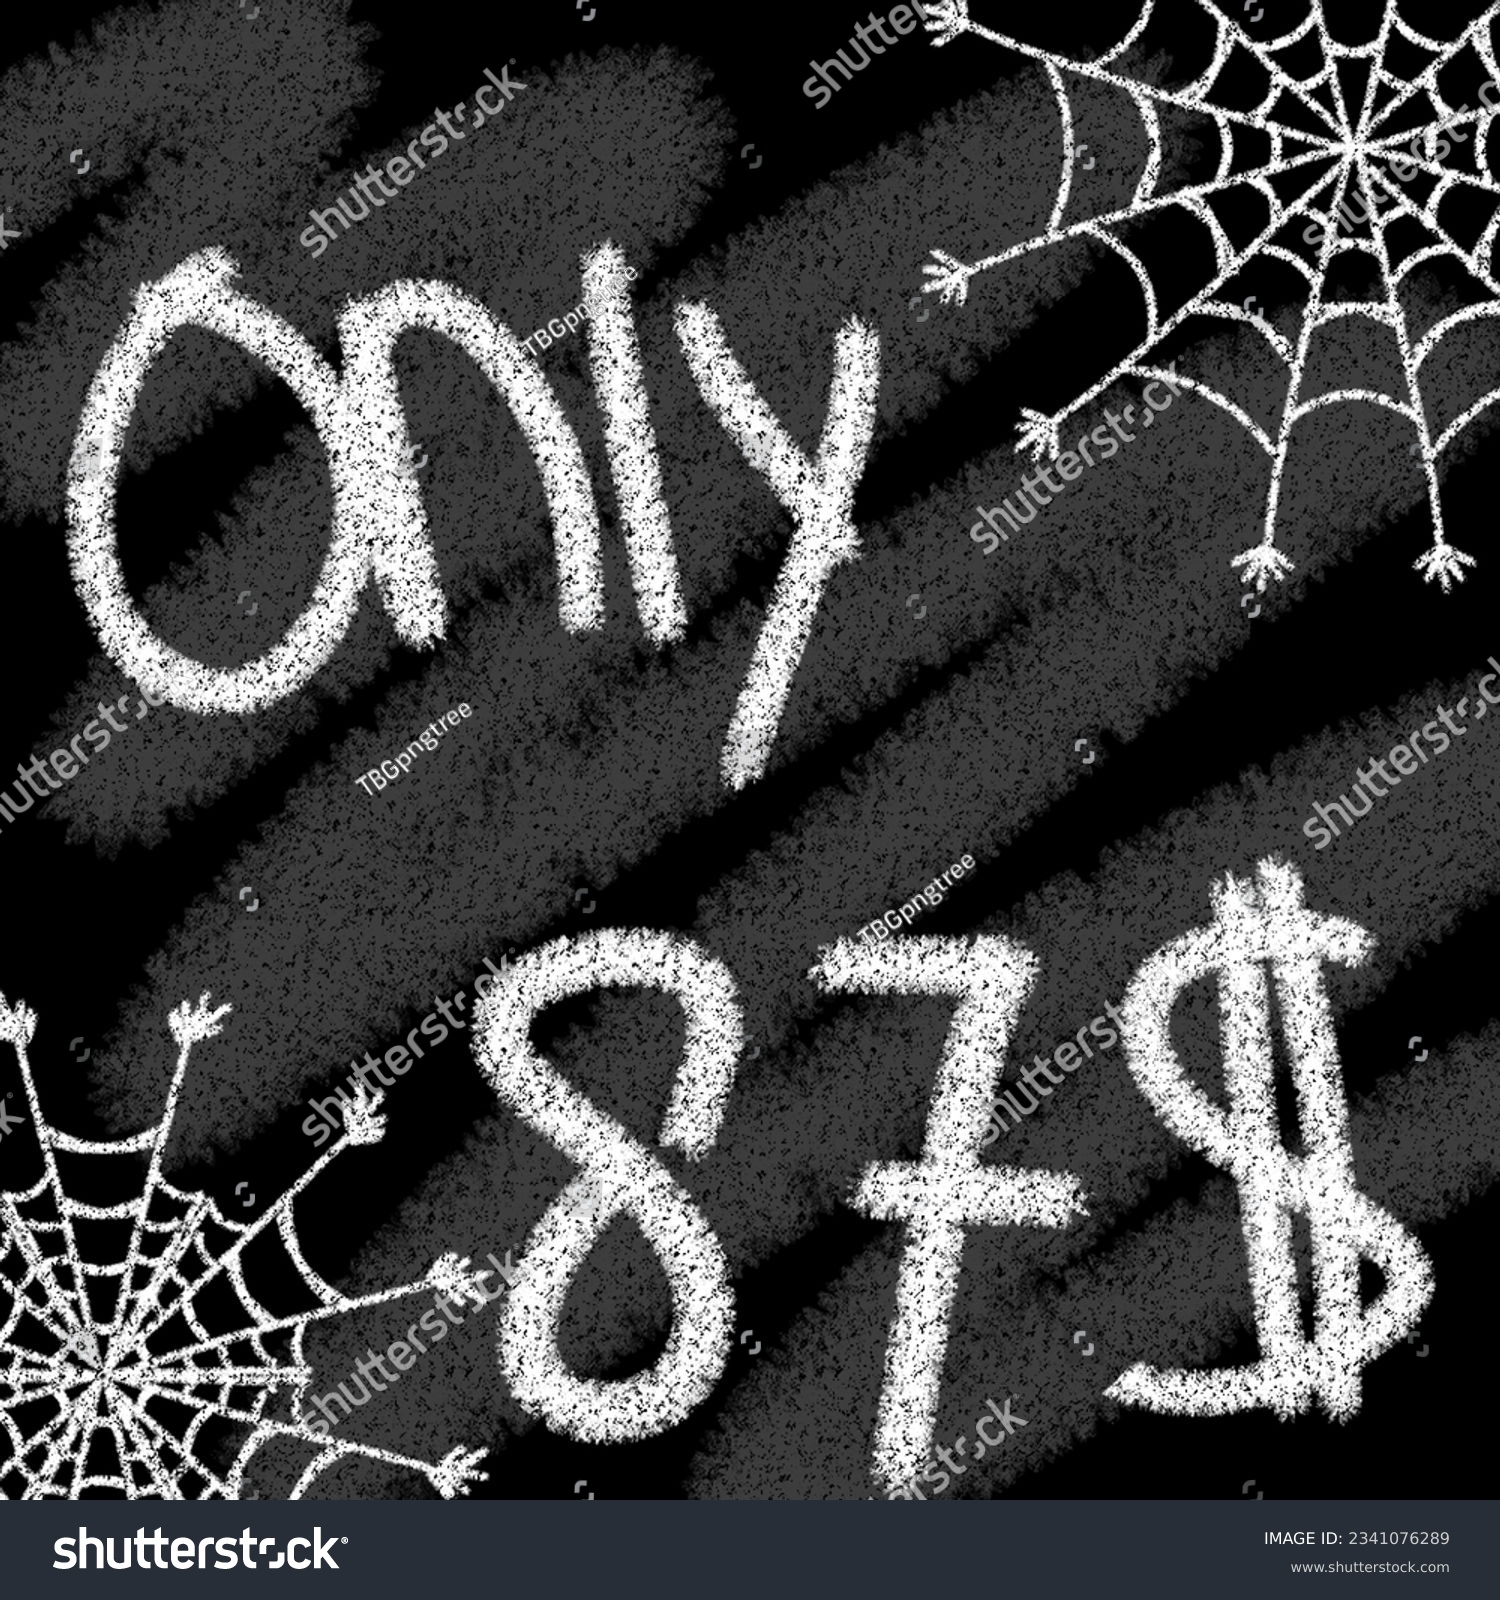 SVG of Only 70 71 72 73 74 75 76 77 78 79 80 81 82 83 84 85 86 87 88 89 90 91 92 93 94 95 96 97 98 99 100 dollar banner with typographic style chalk and blackboard helloween with spider web  svg